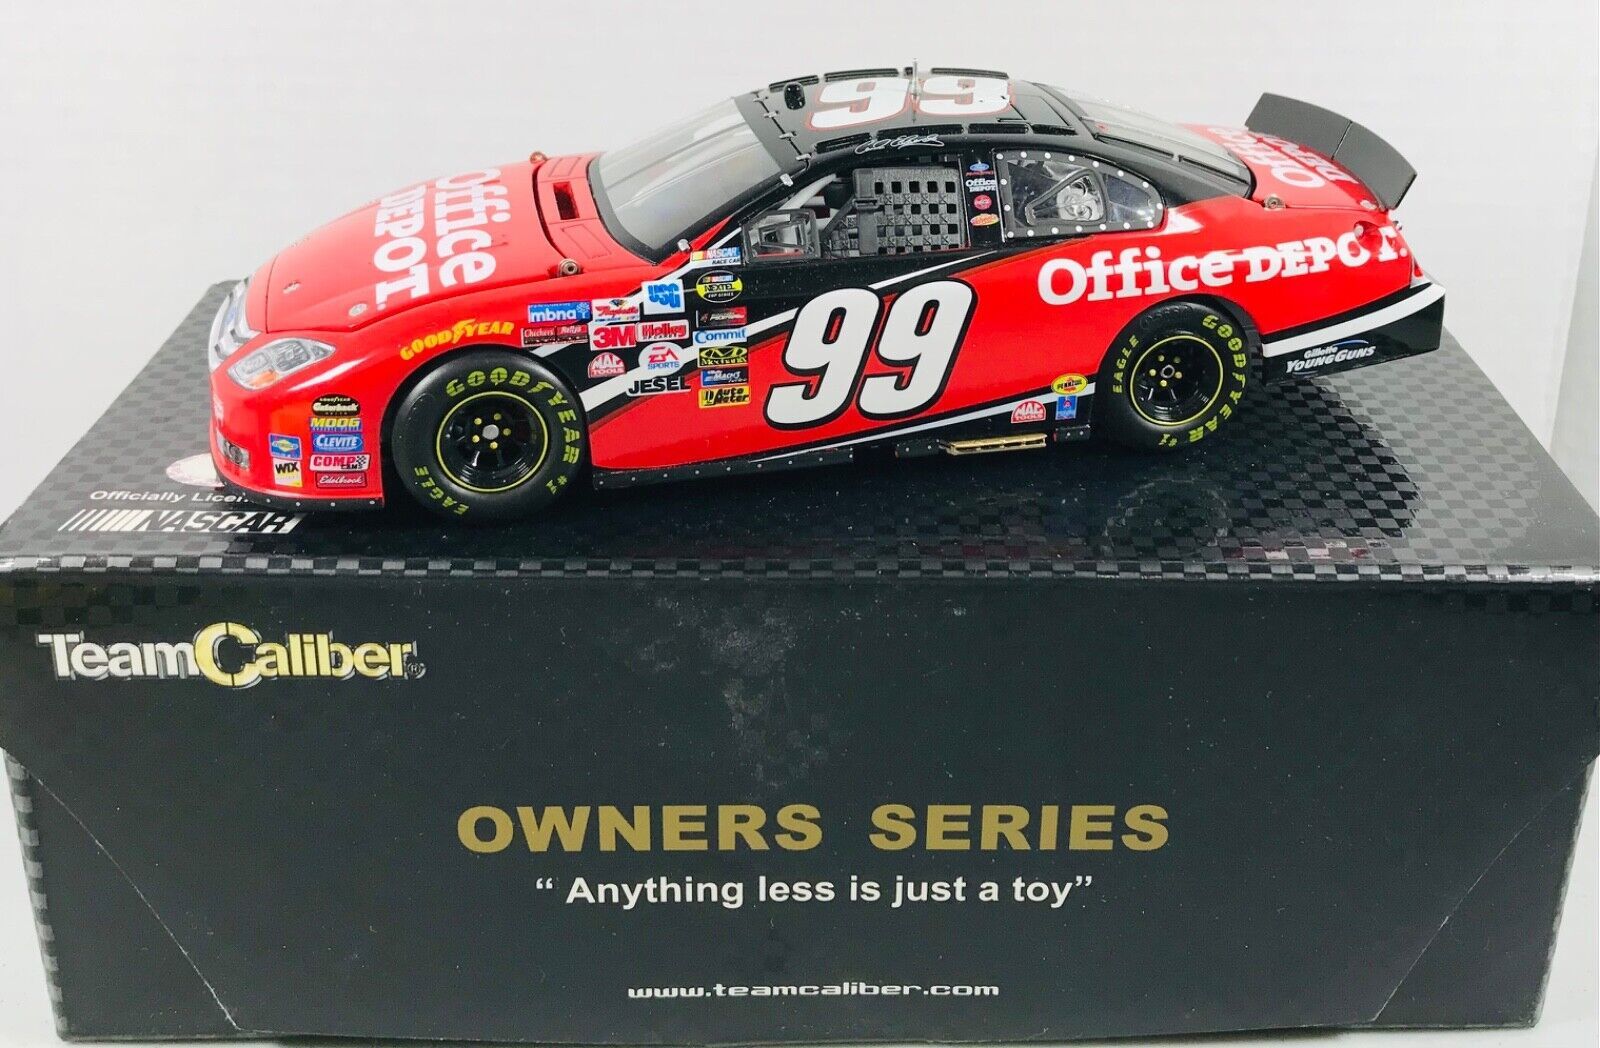 Primary image for 99 Carl Edwards - Team Caliber Owners Series - 2006 Office Depot - 1/24 Die Cast